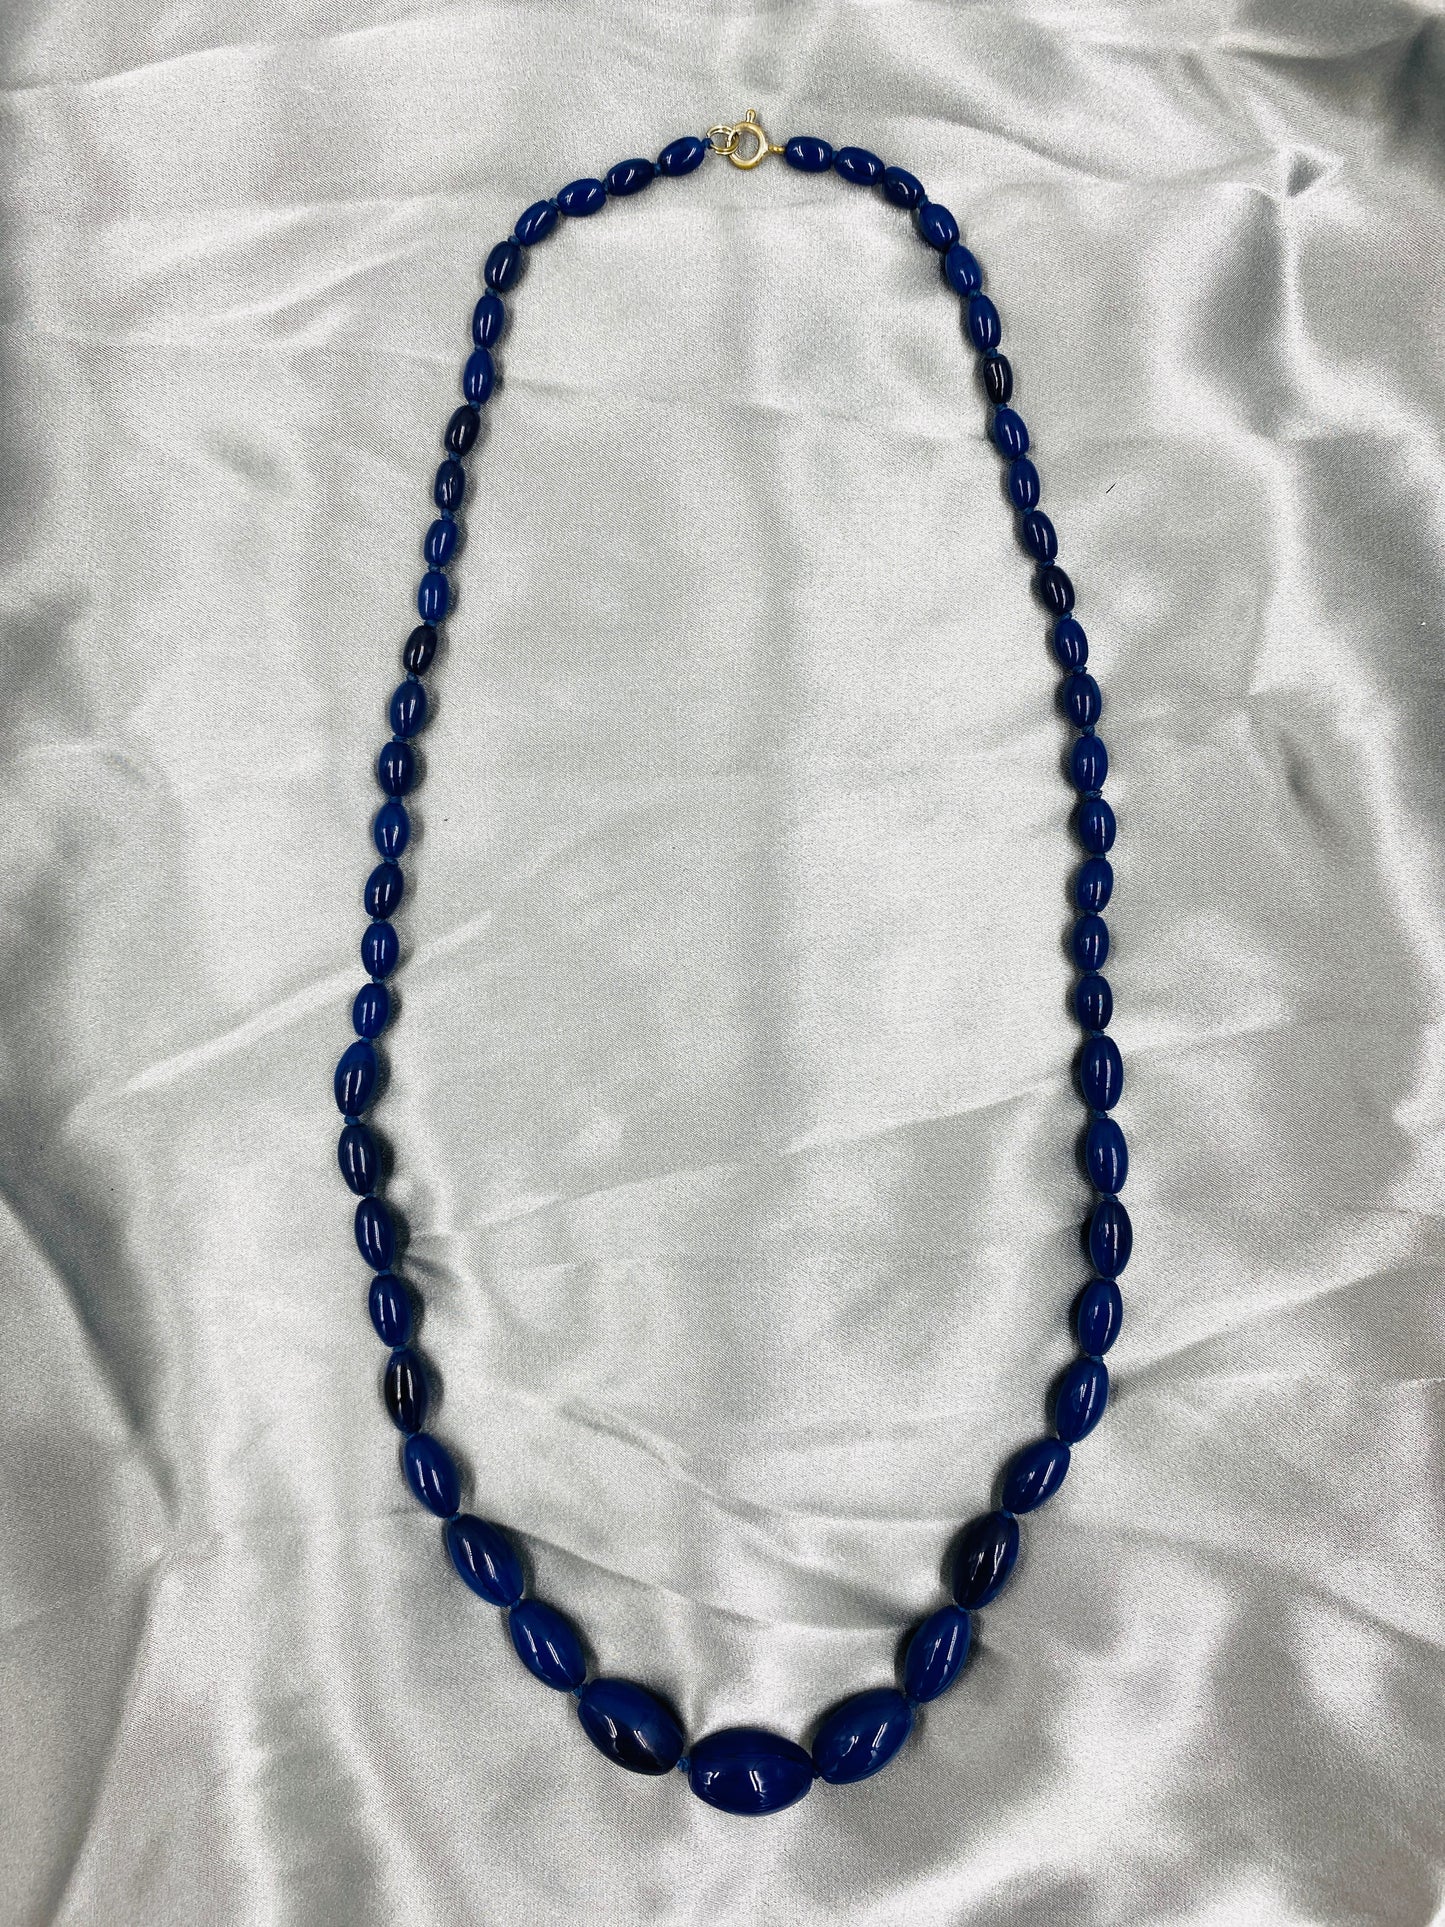 Vintage 1930s Style Blue Glass Bead Necklace